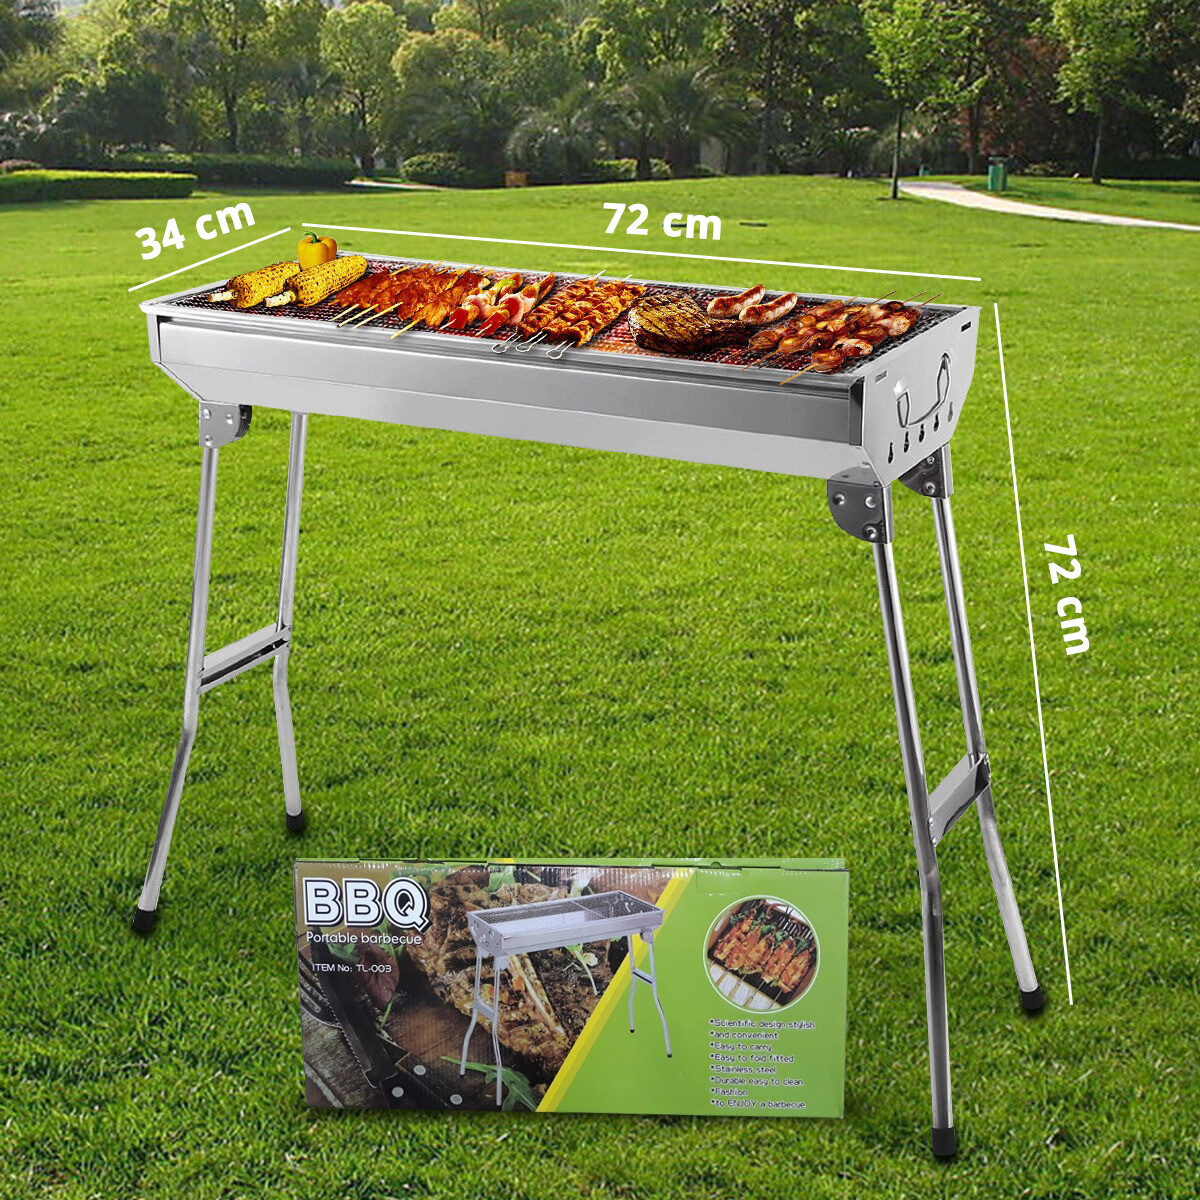 Stainless Steel Portable Barbecue Grill For Outdoor Cooking Camping Hiking Picnics